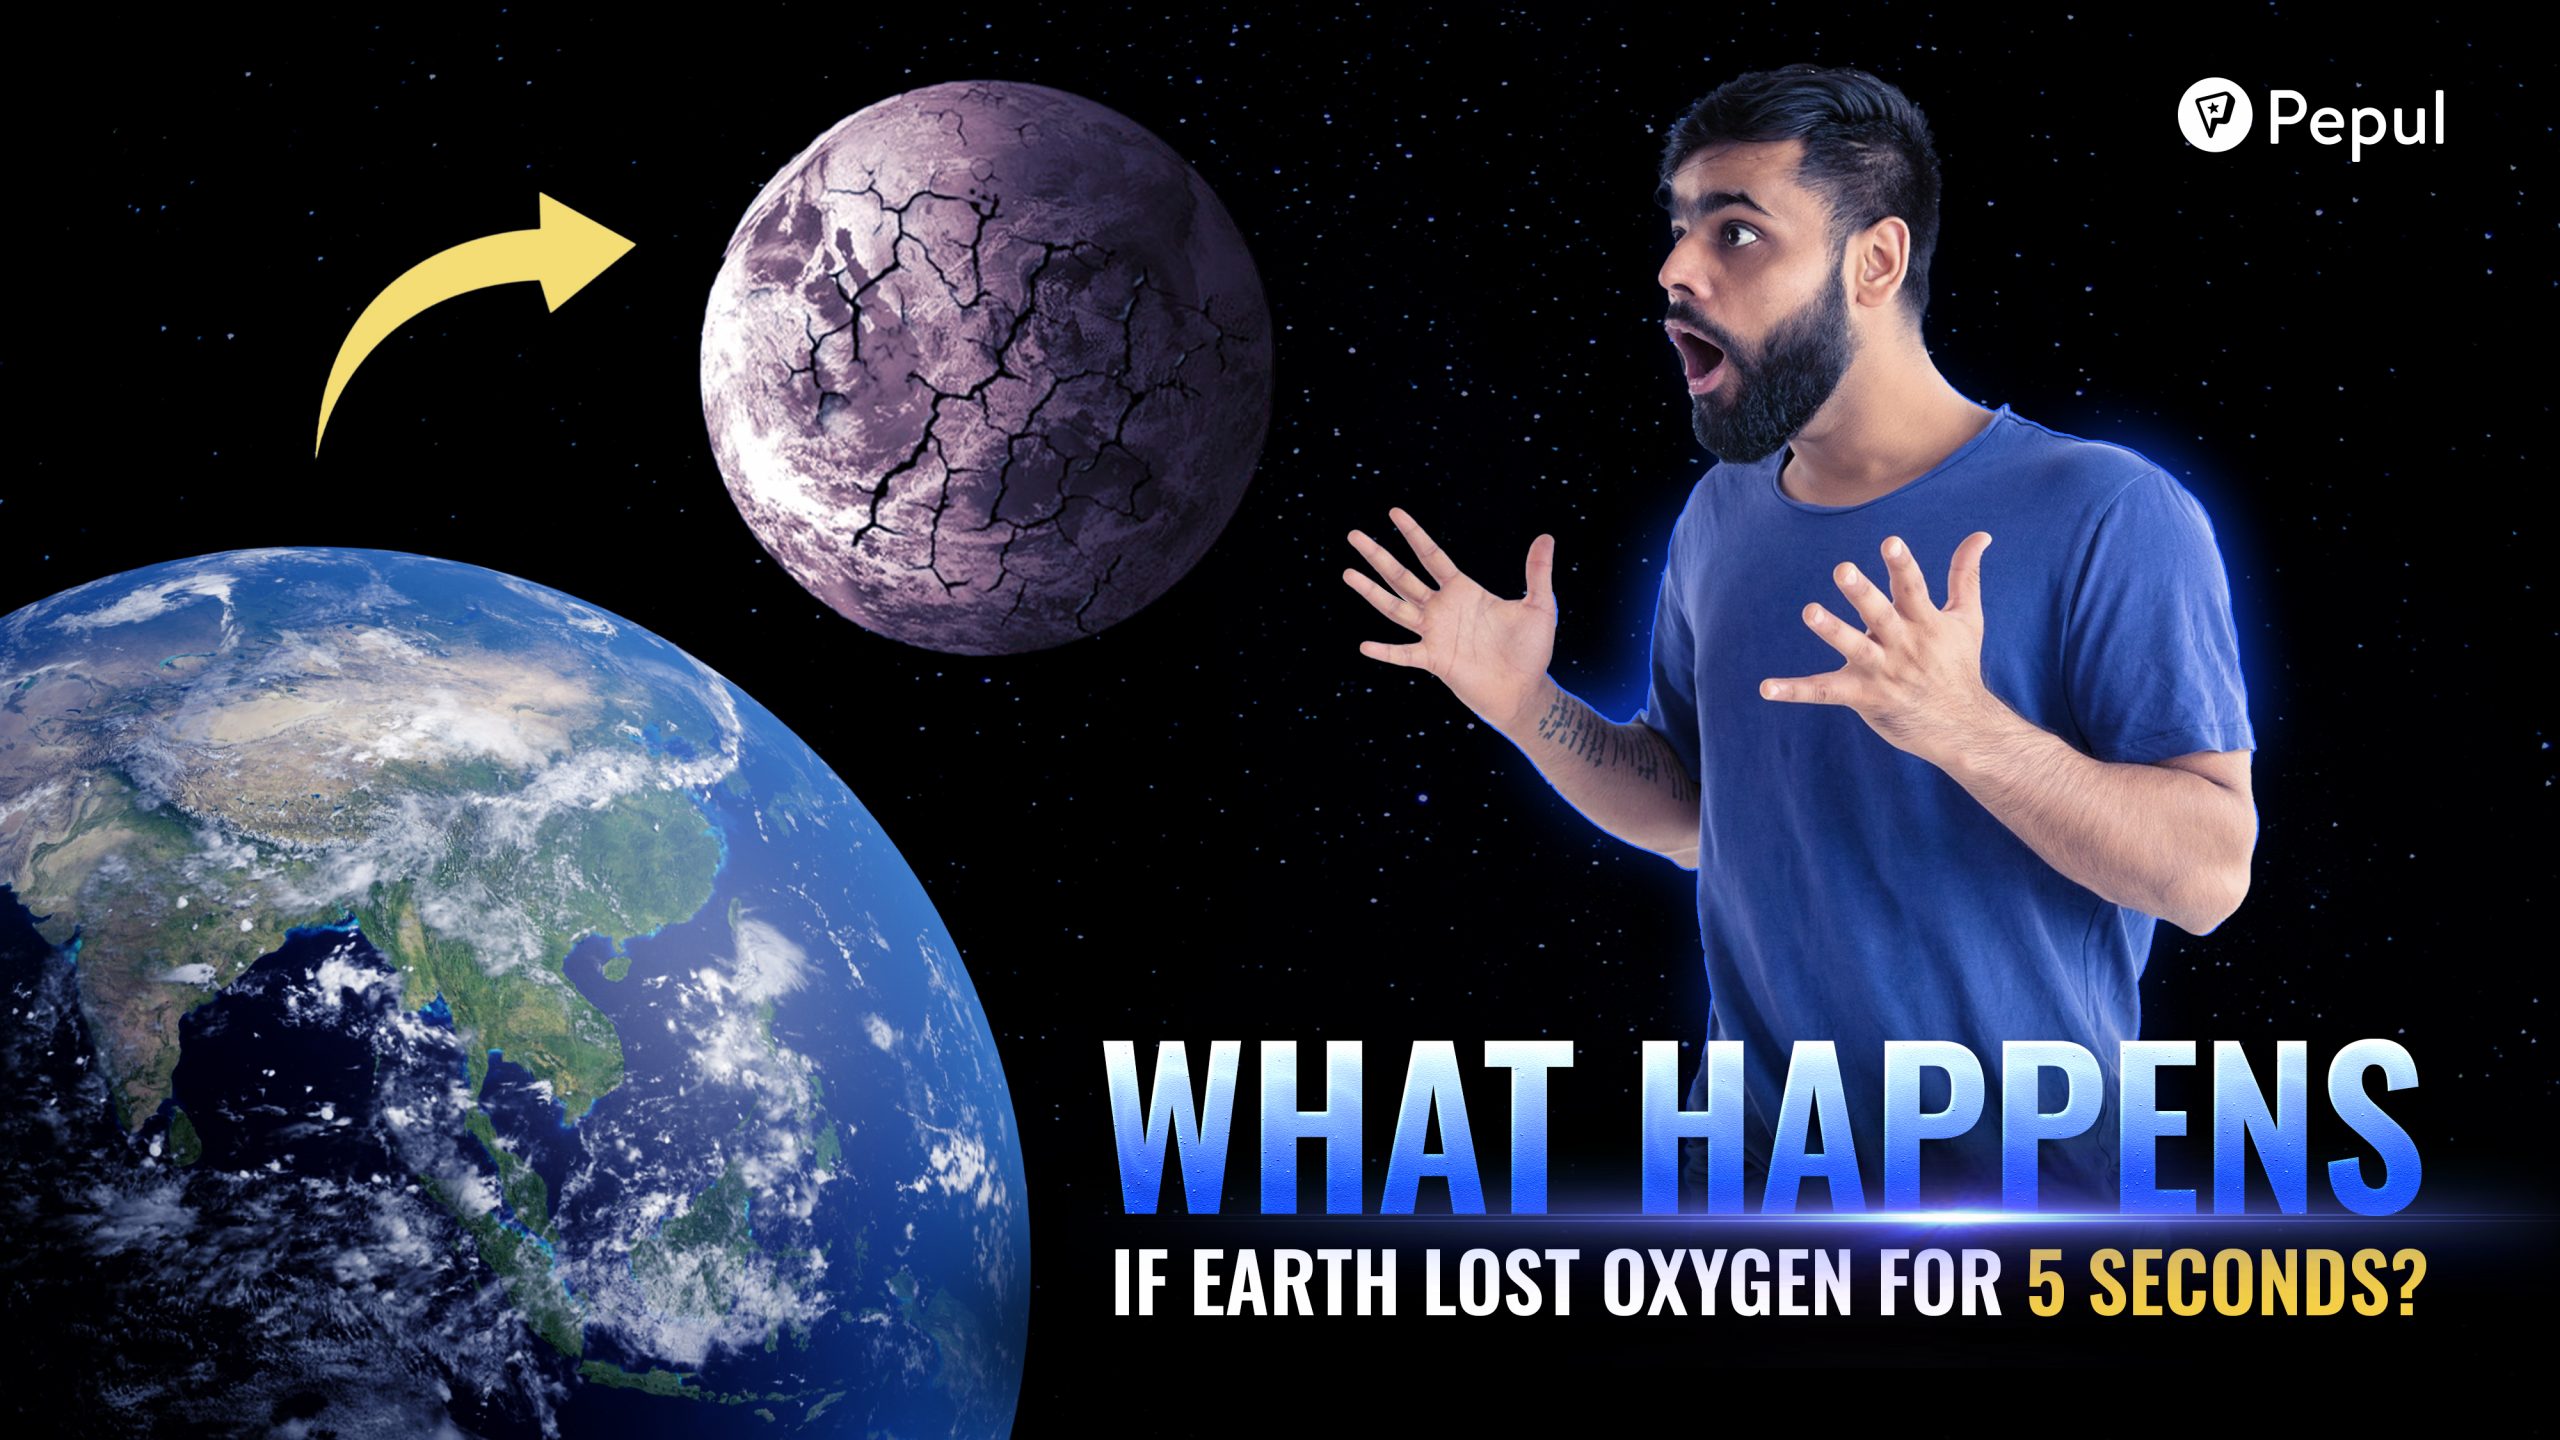 What if Earth Lost Oxygen for 5 Seconds